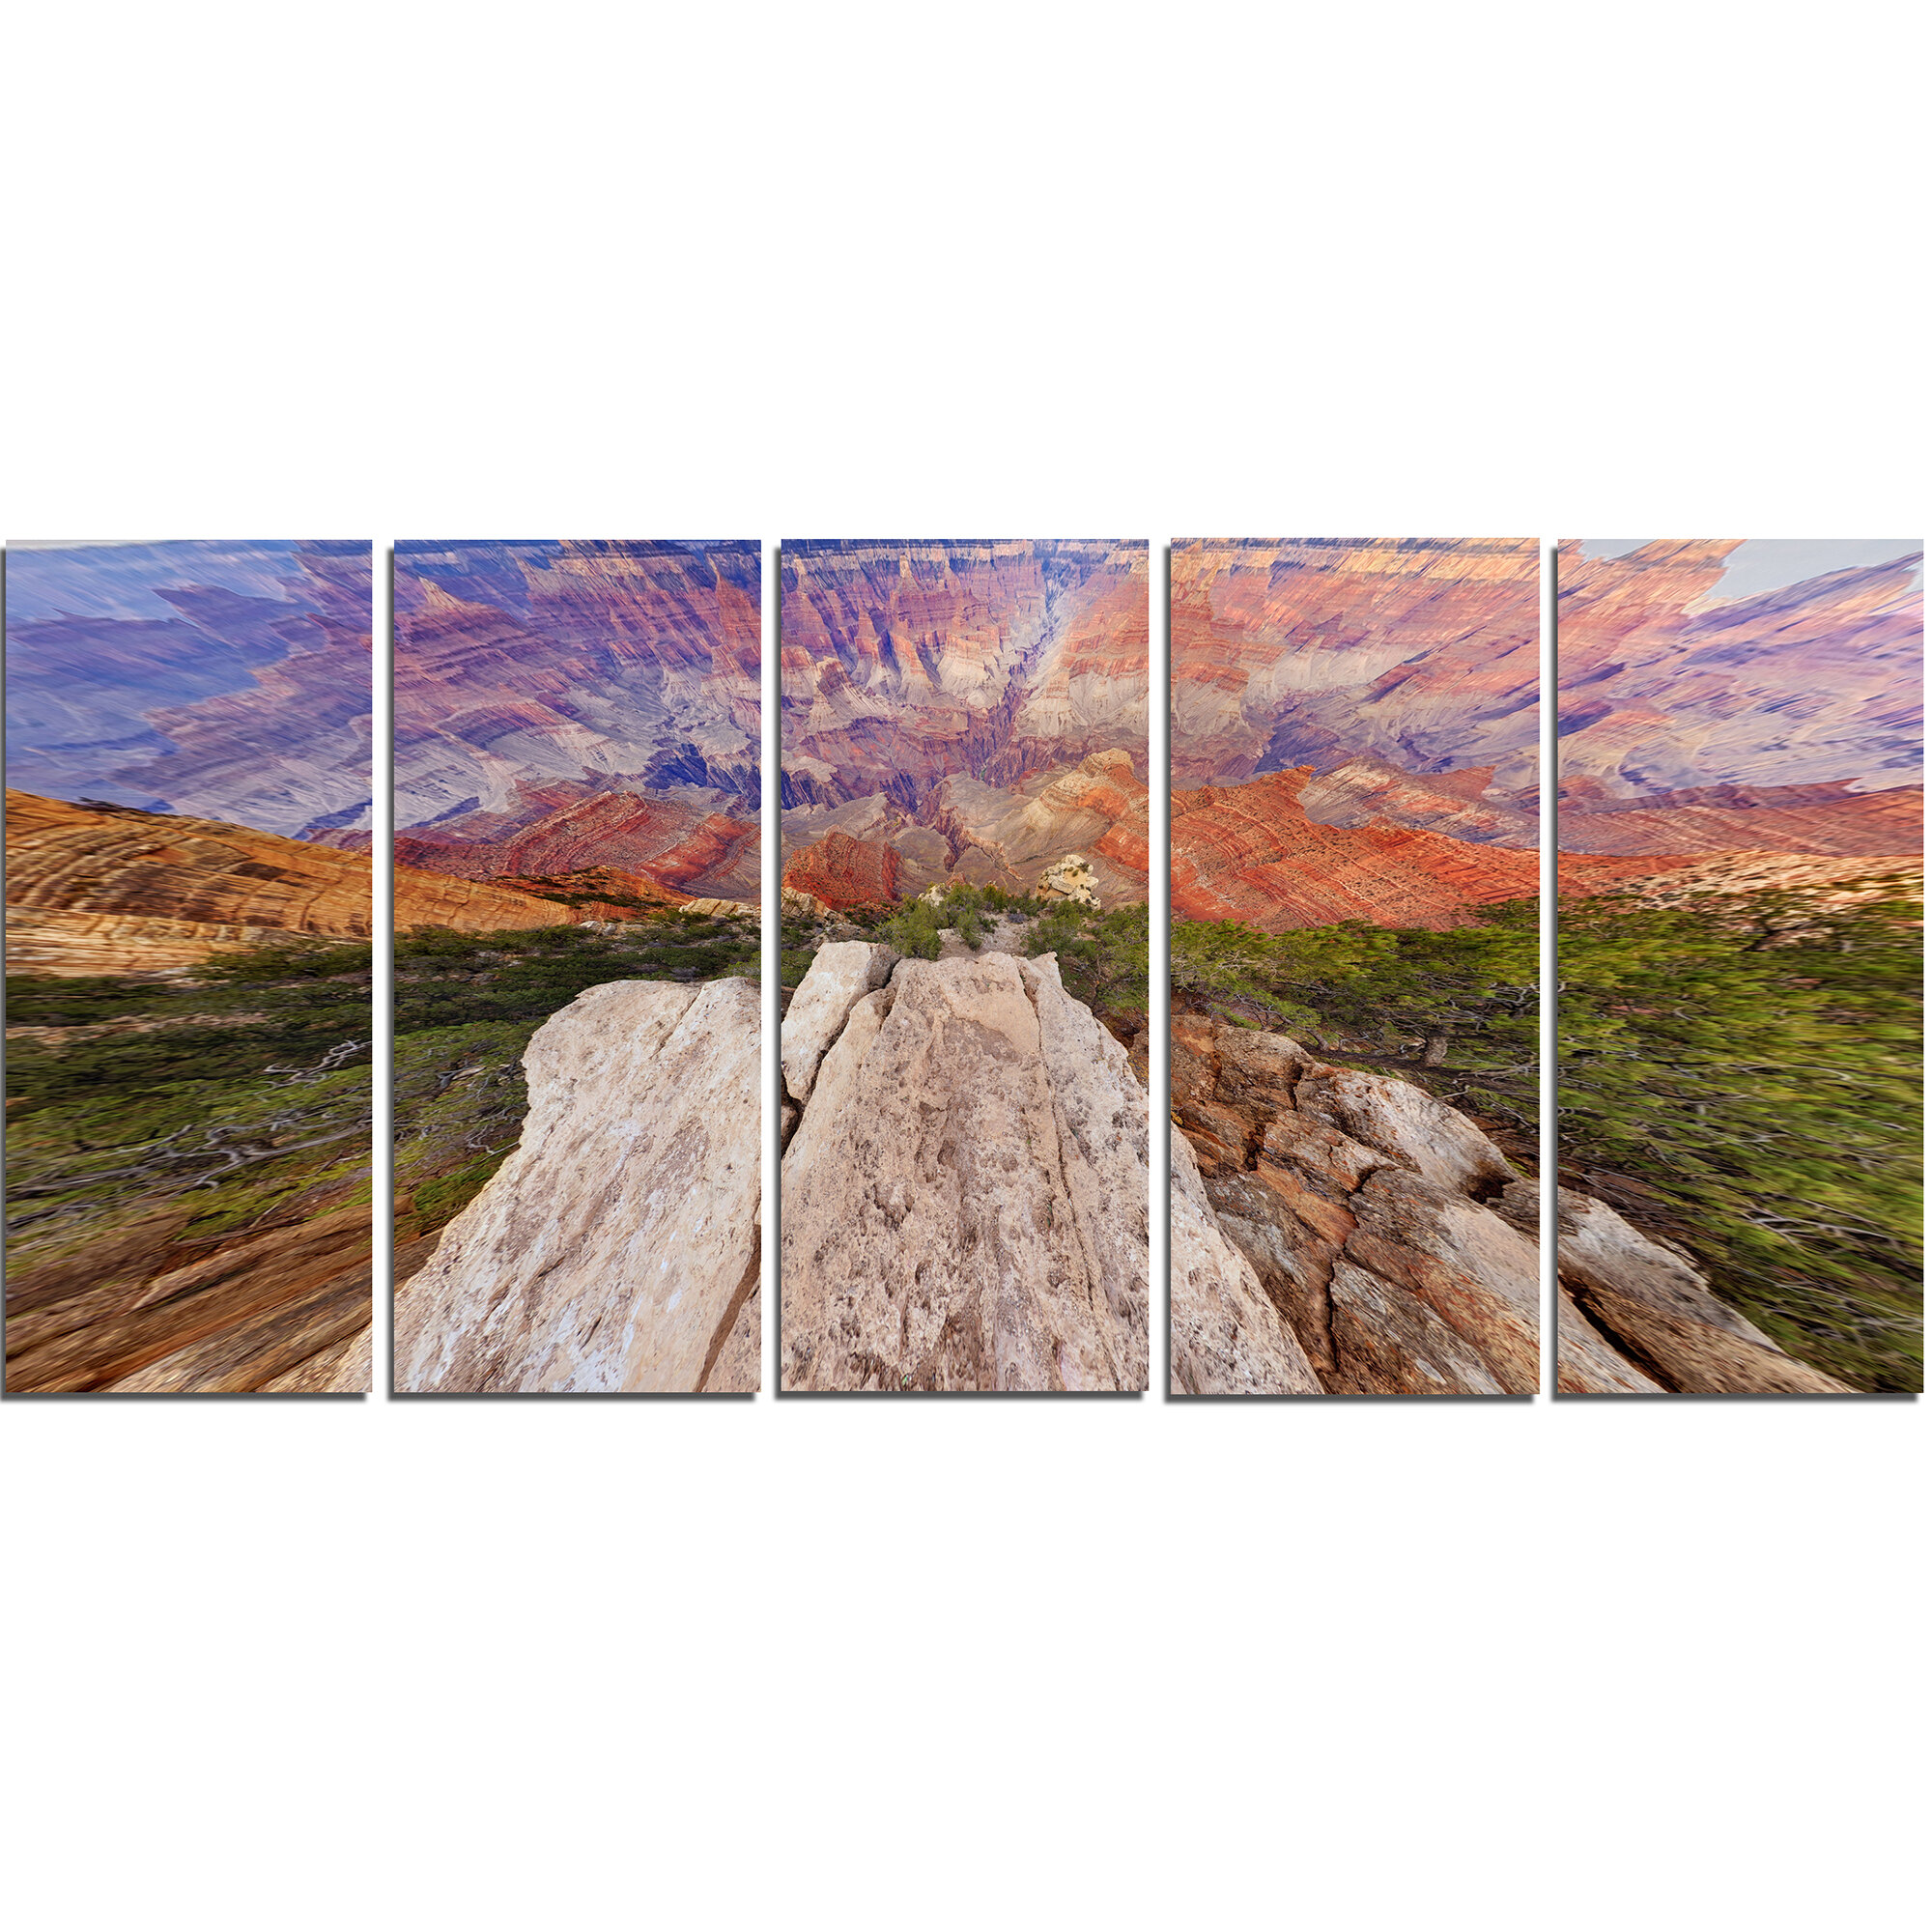 Designart Grand Canyon View From Above 5 Piece Wall Art On Wrapped Canvas Set Wayfair Ca